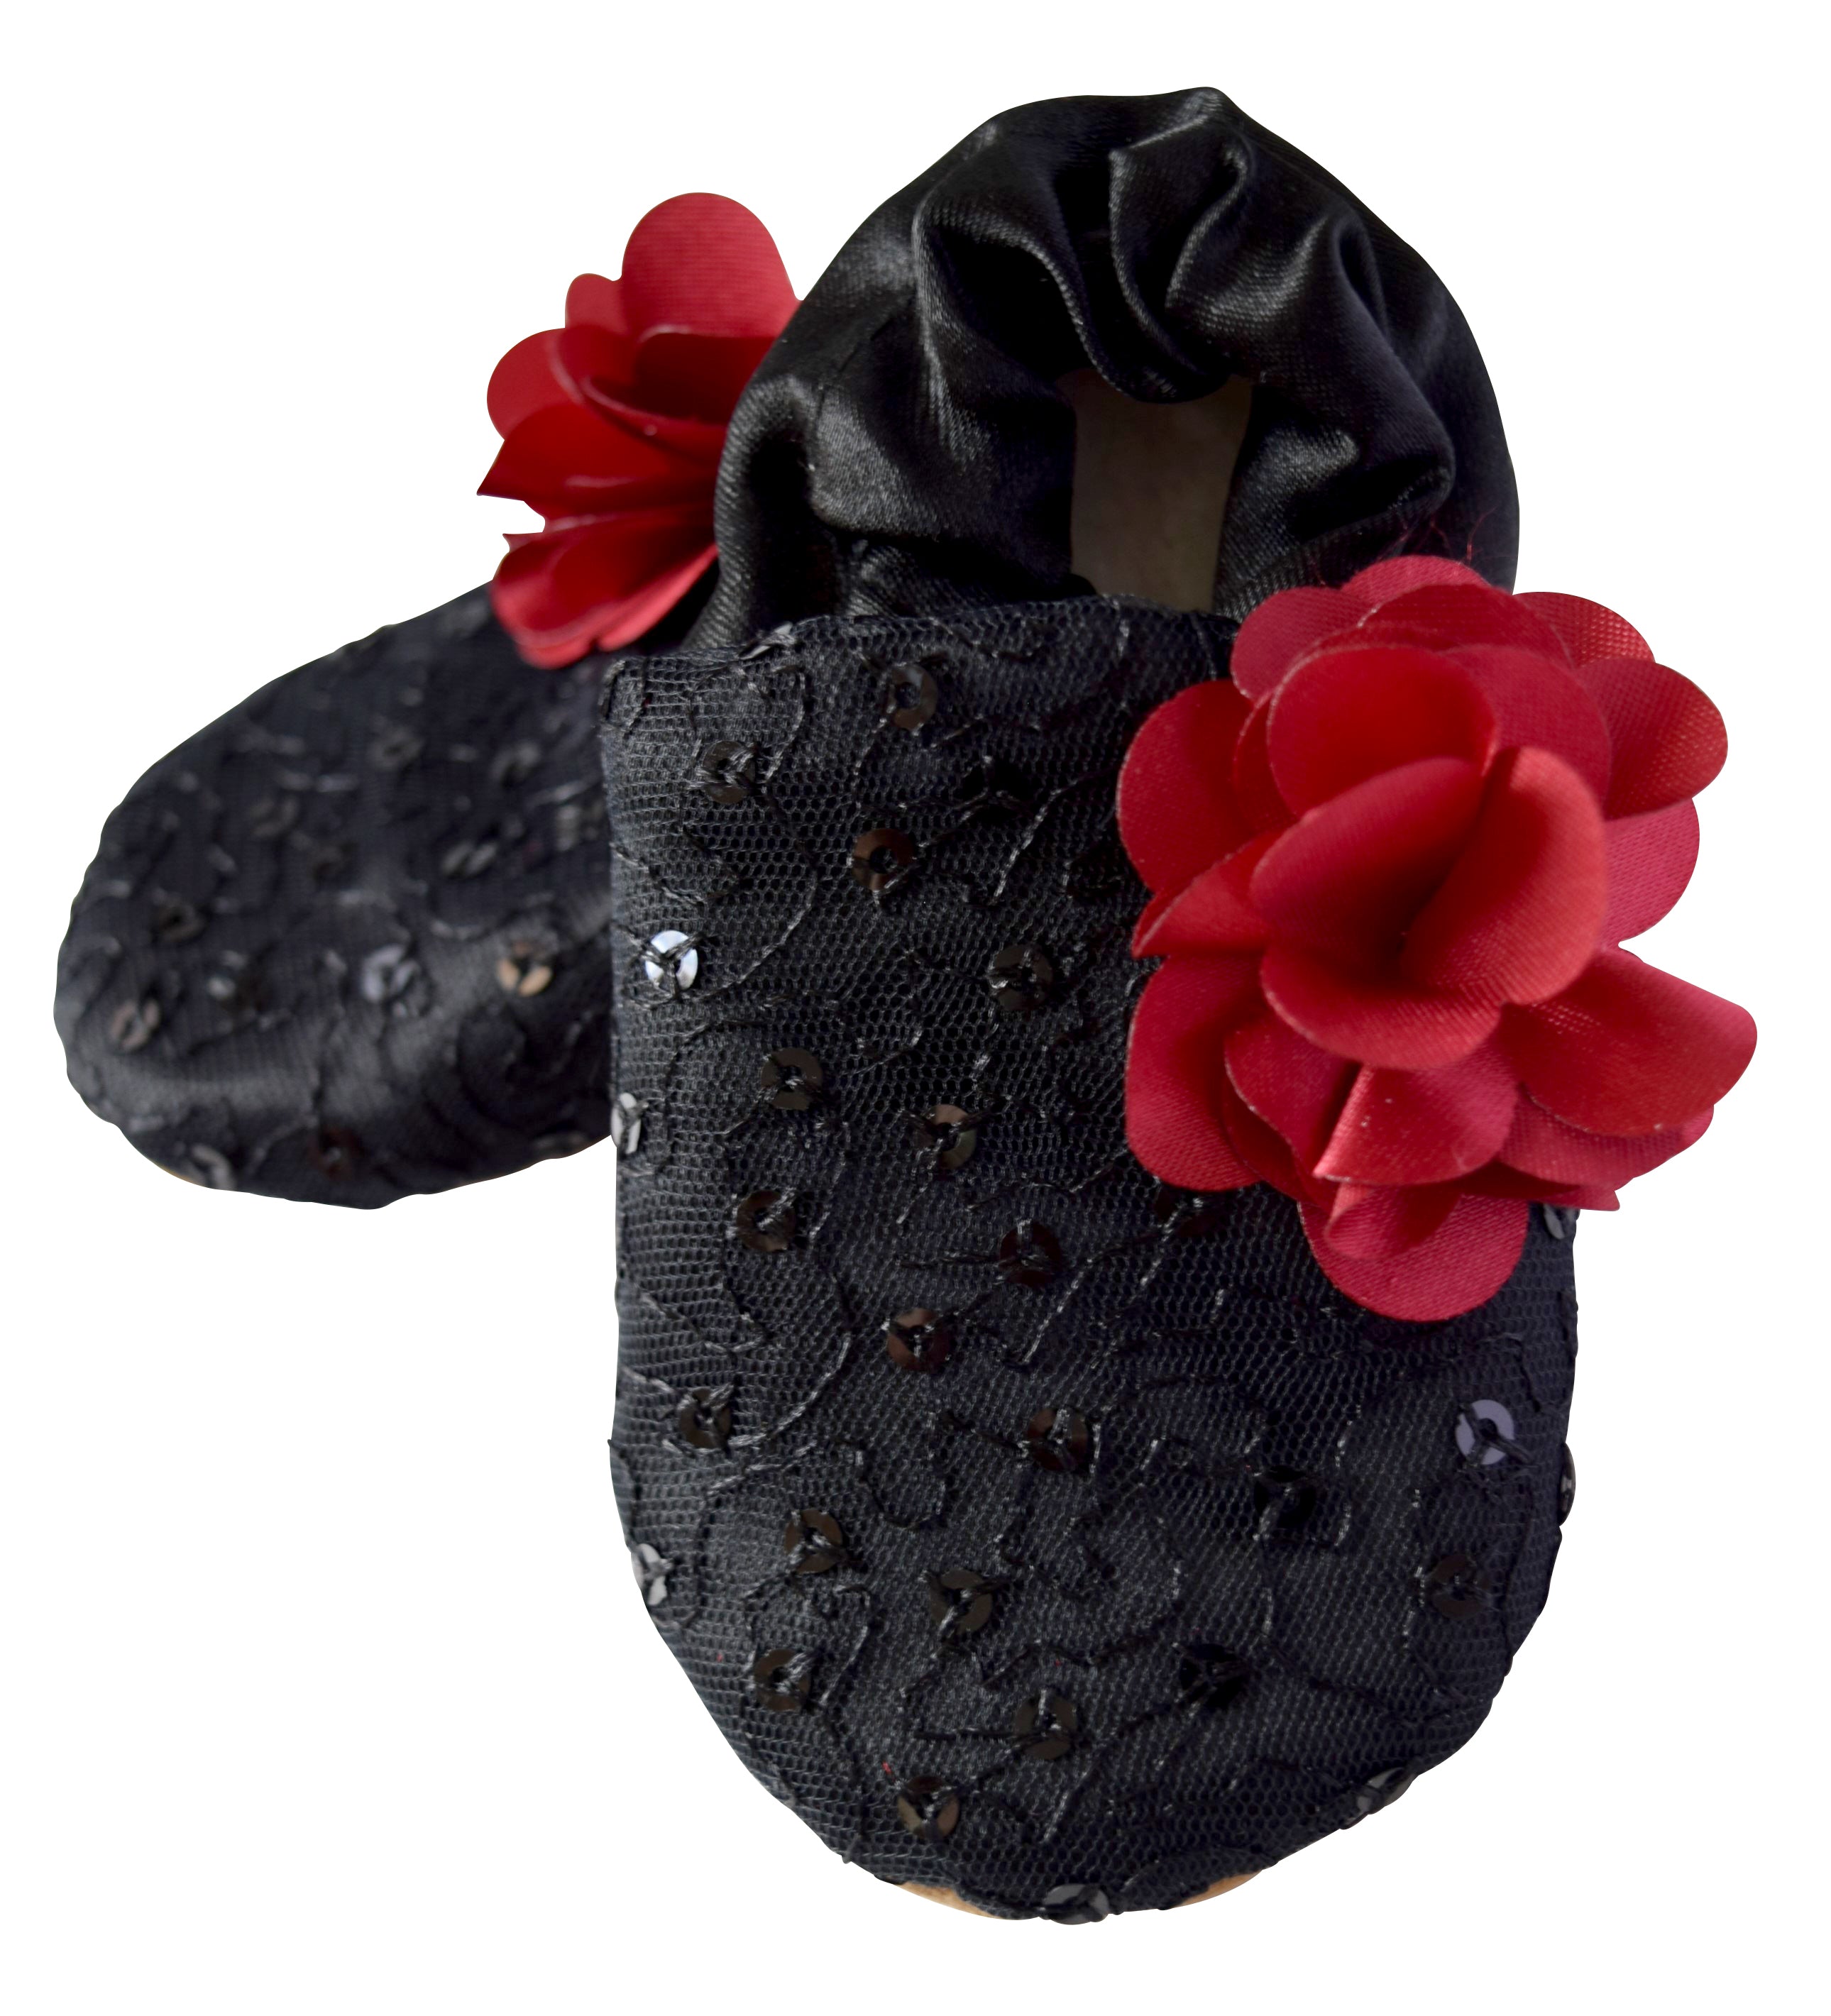 Kids Shoes_Black Mono Lace on Black Satin with Maroon Flower Booties